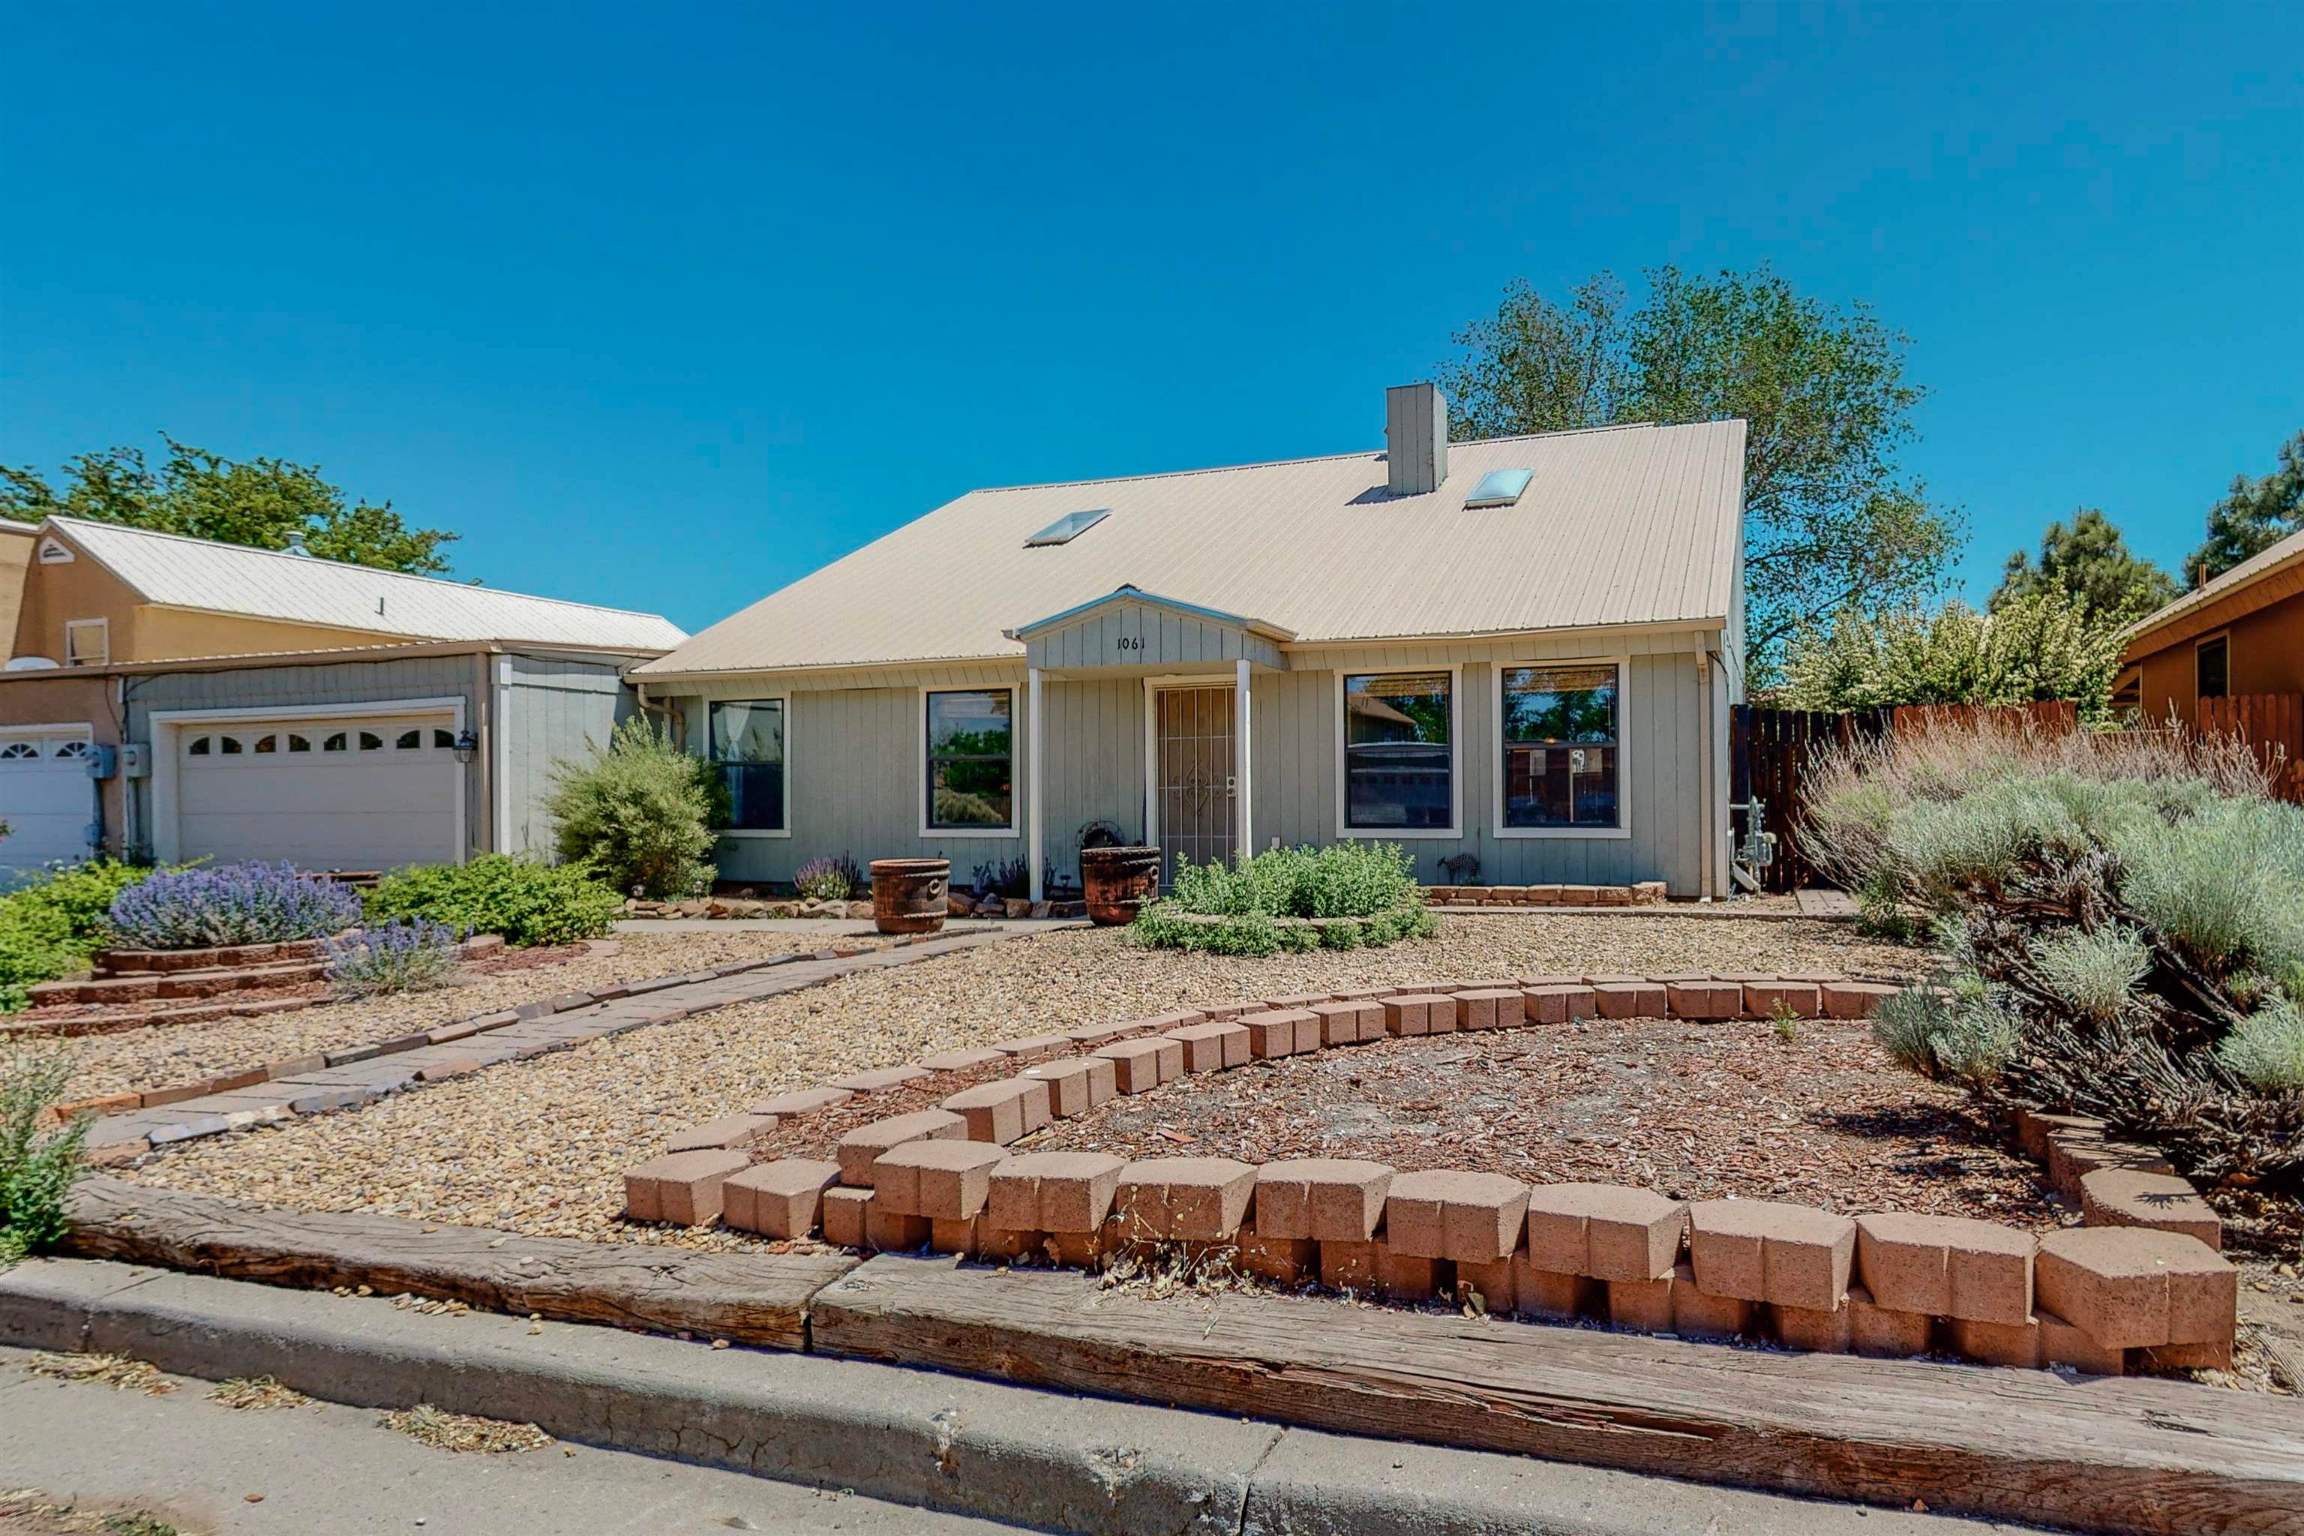 1061 WILLOW, Santa Fe, New Mexico 87507, 3 Bedrooms Bedrooms, ,2 BathroomsBathrooms,Residential,For Sale,1061 WILLOW,202201813